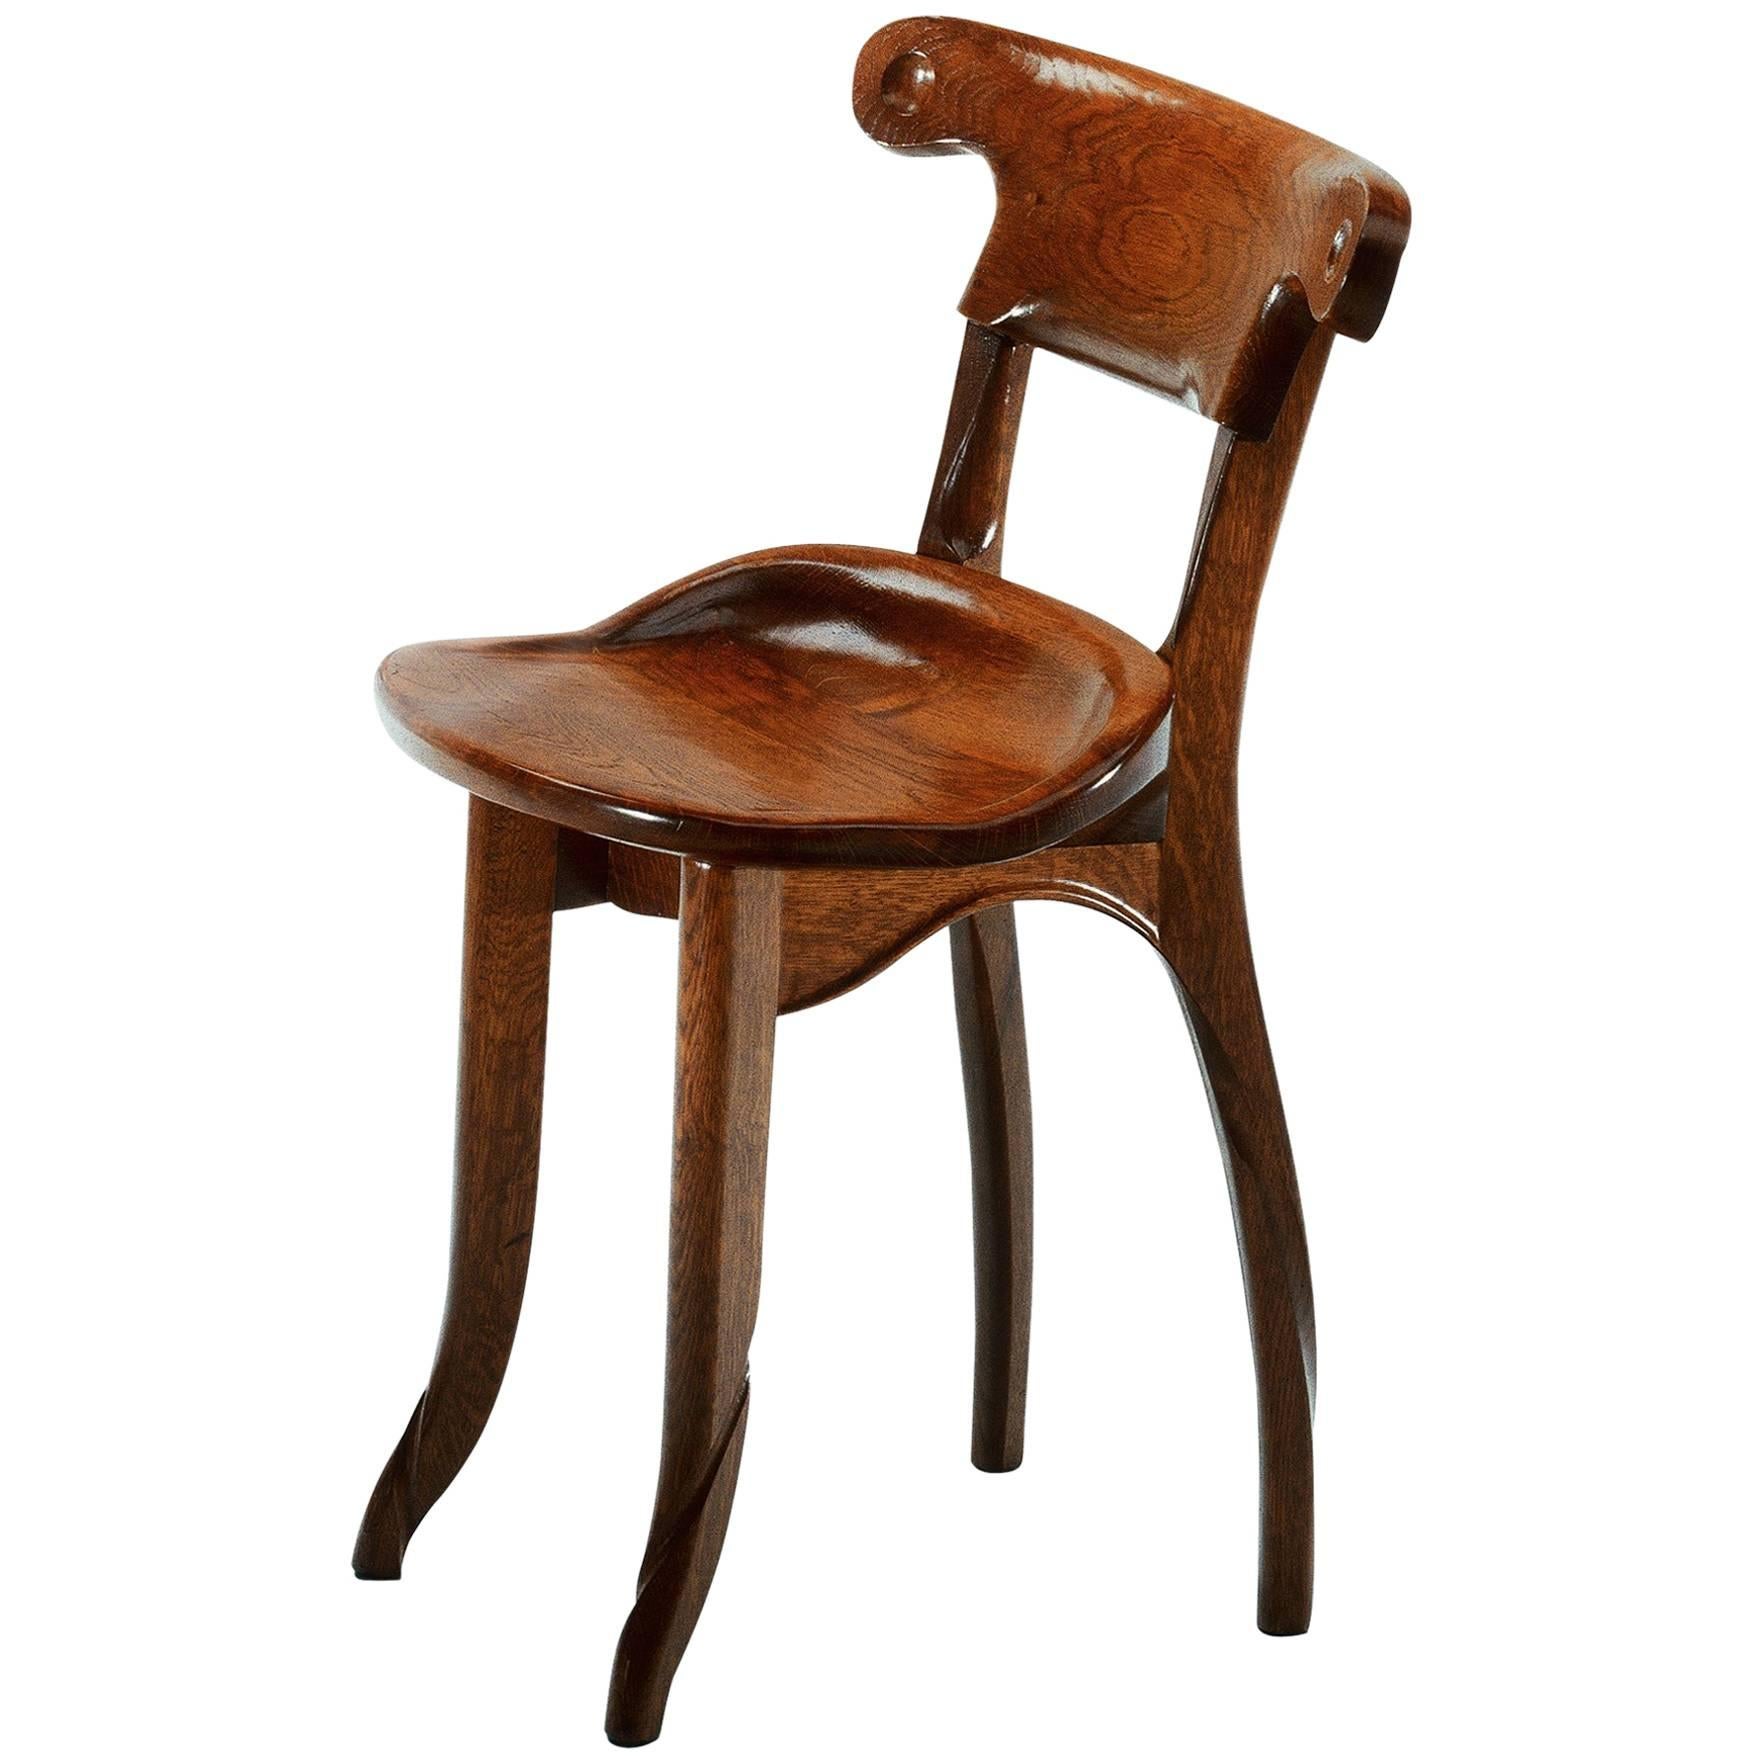 Batllo chair designed by Antoni Gaudi, circa 1906 and manufactured by BD furniture in Barcelona.

Solid varnished oak
Measures: 47 x 52 x 74 H.cm


Batlló chair BD Barcelona design

A company that has always attributed such great importance